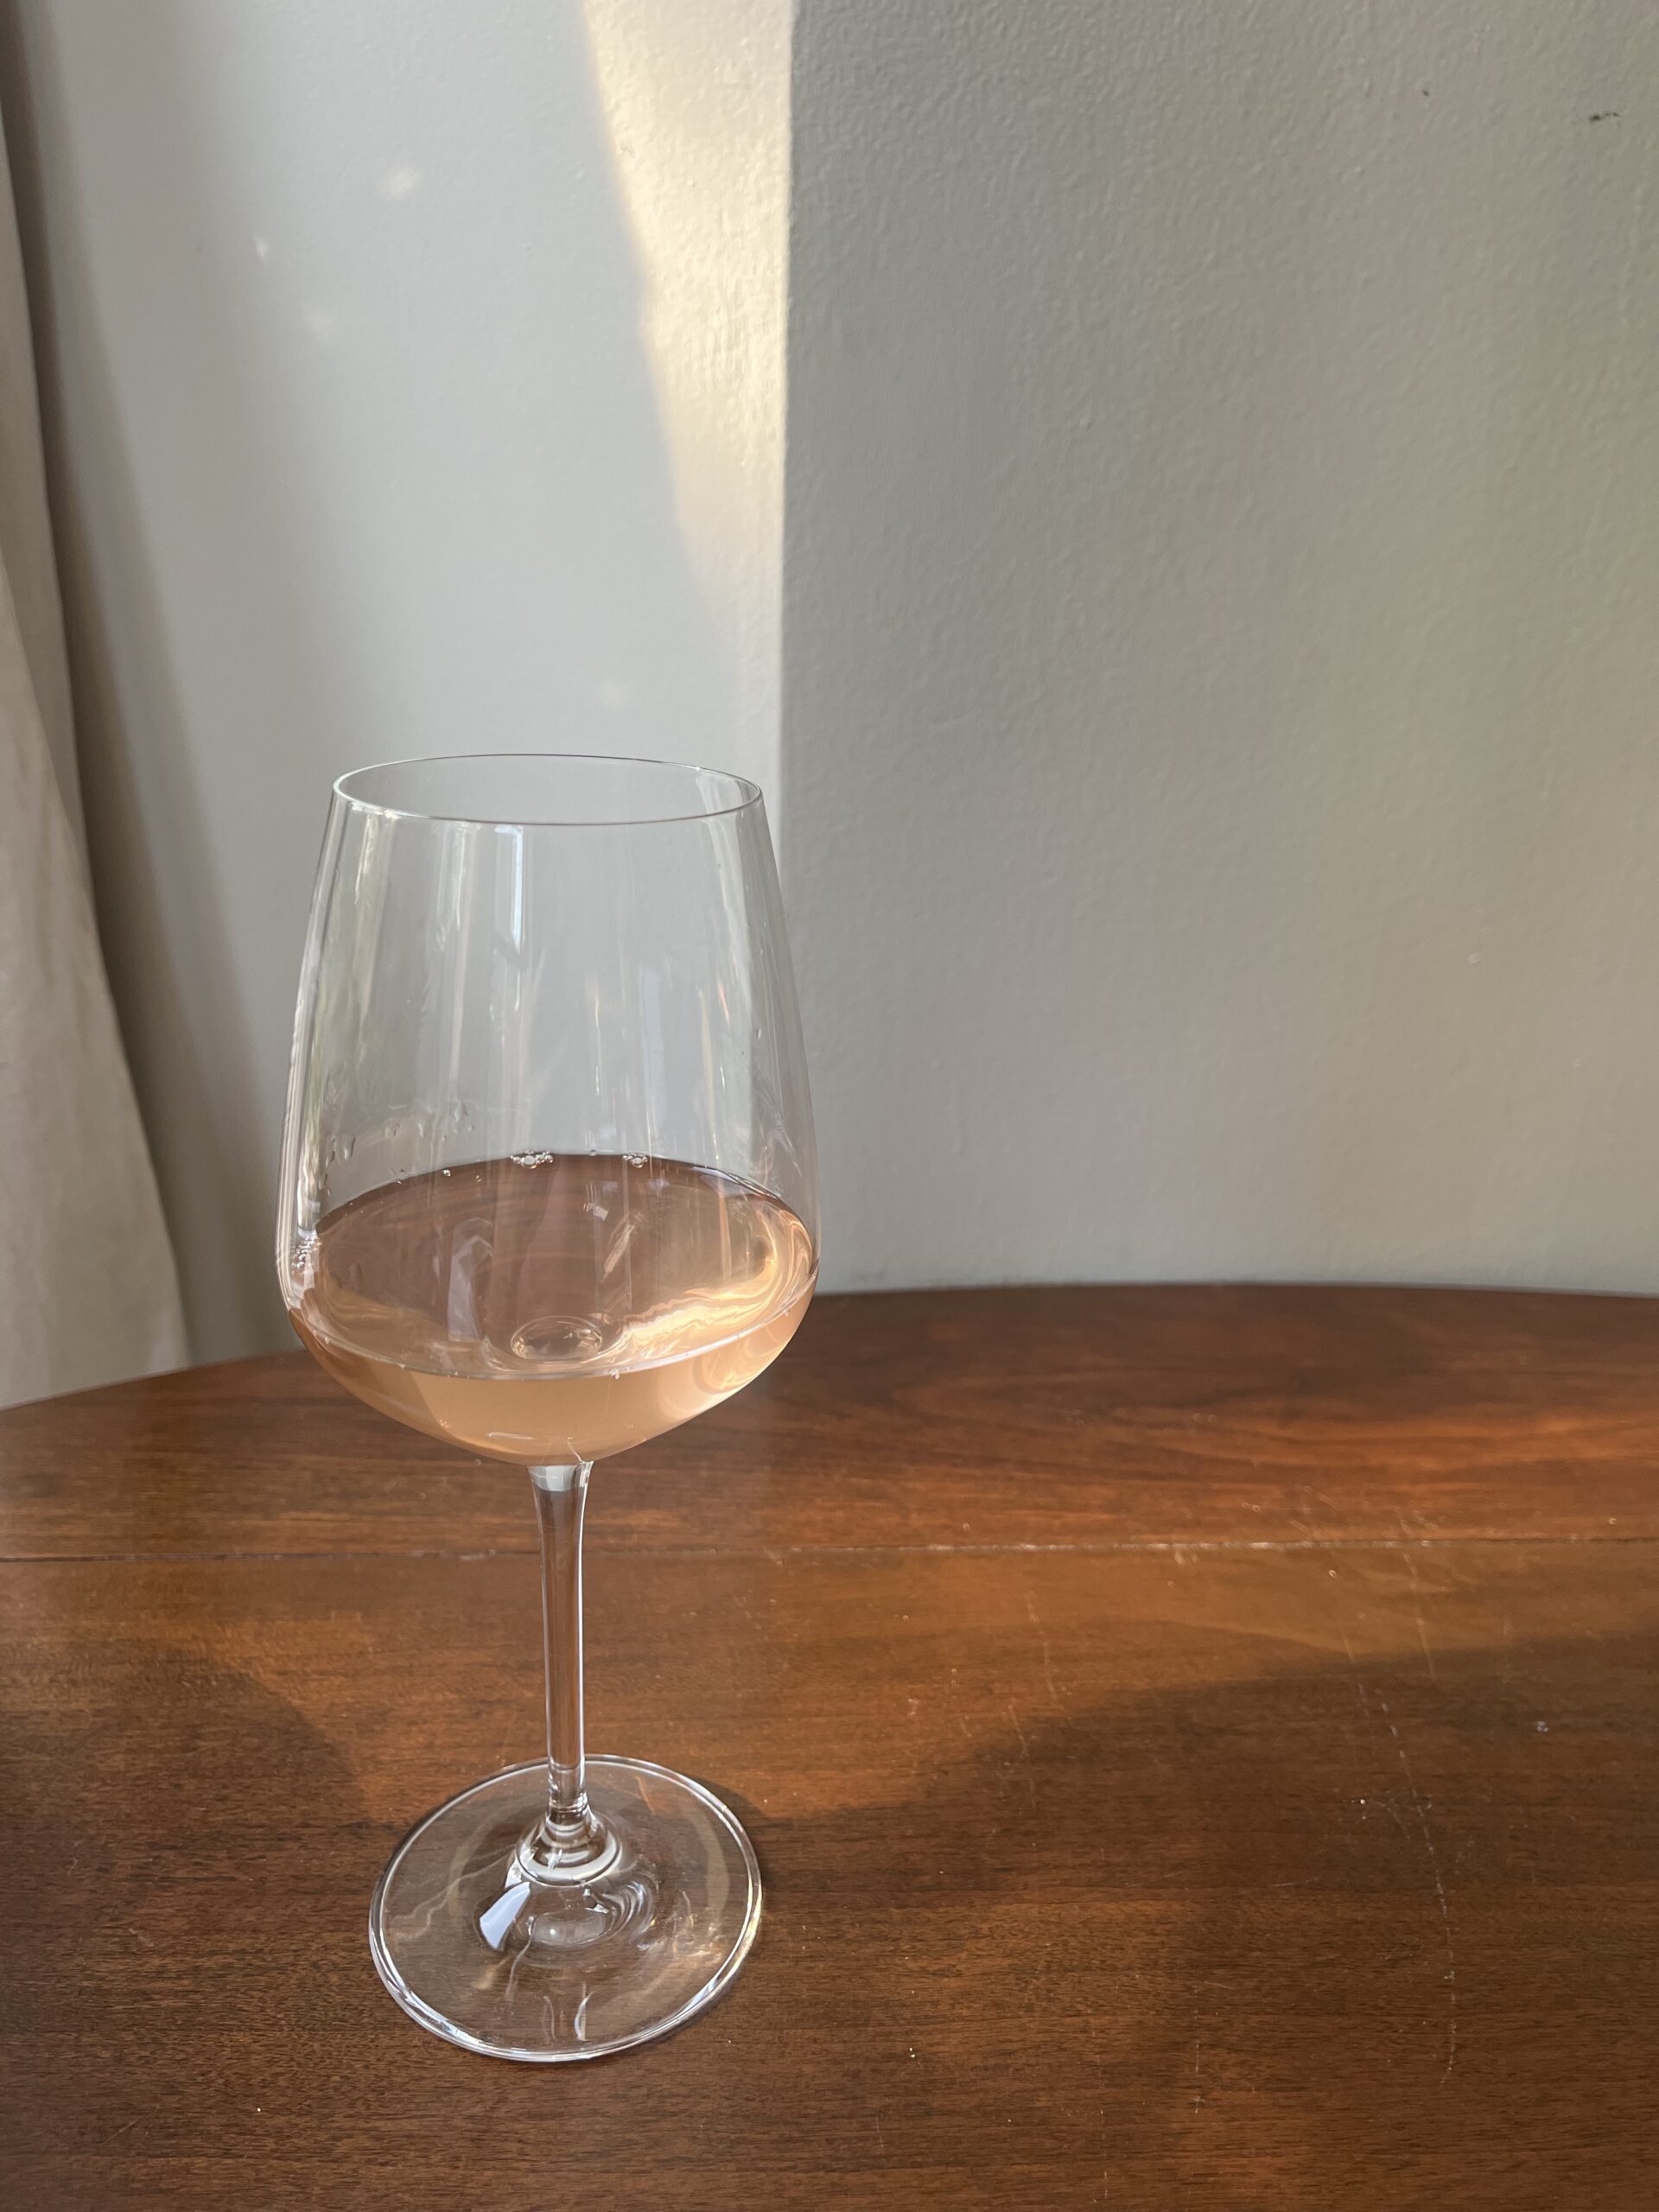 A half-full glass of rosé wine sits on a wooden table with soft natural light illuminating the scene.